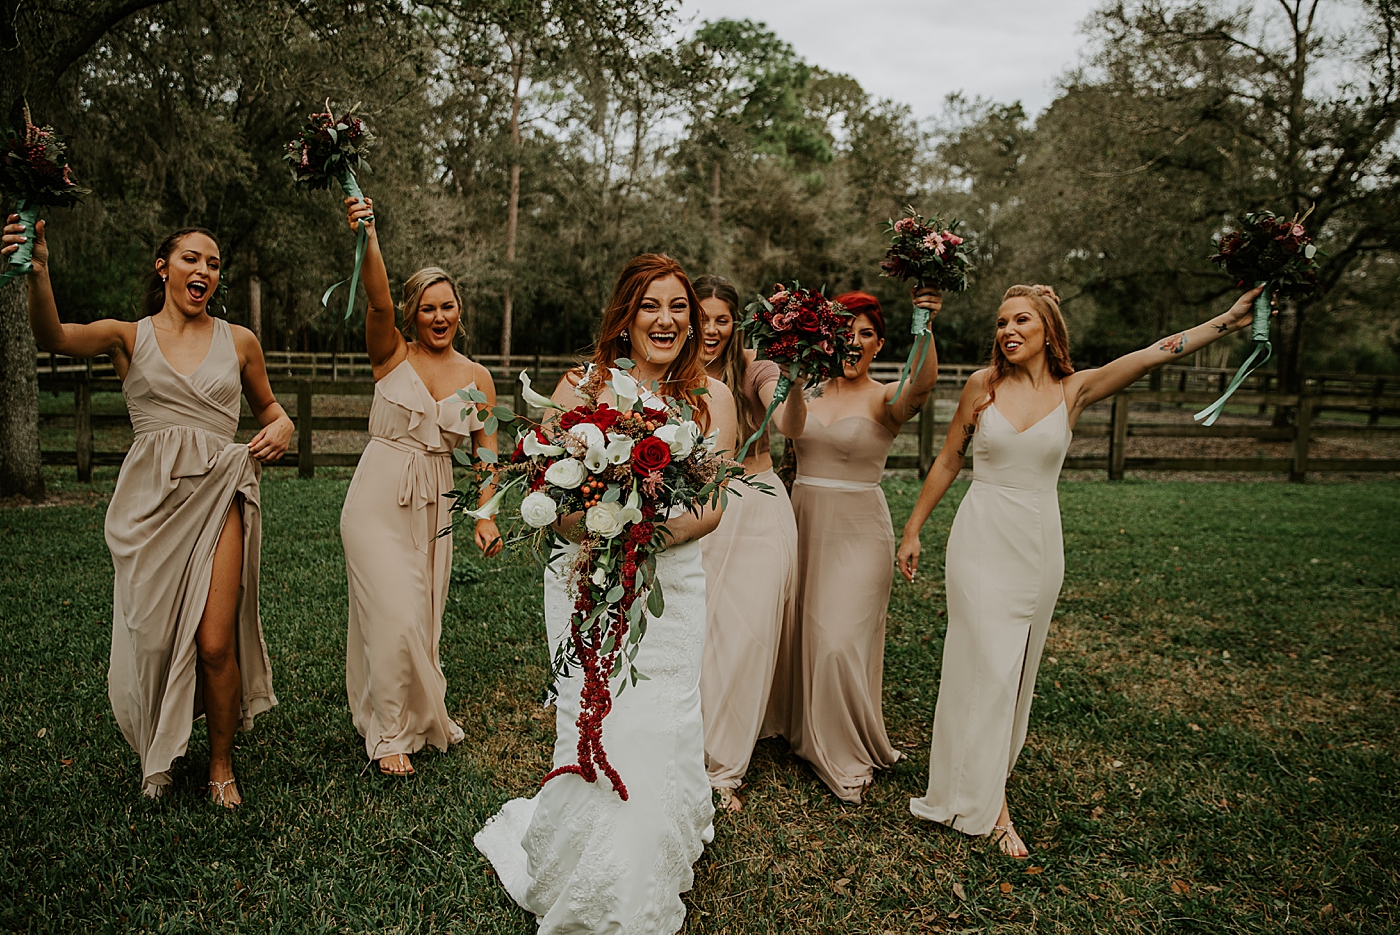 Fun Bride and Bridesmaids shot BMR Stables Wedding Photography captured by South Florida Wedding Photographer Maggie Alvarez Photography